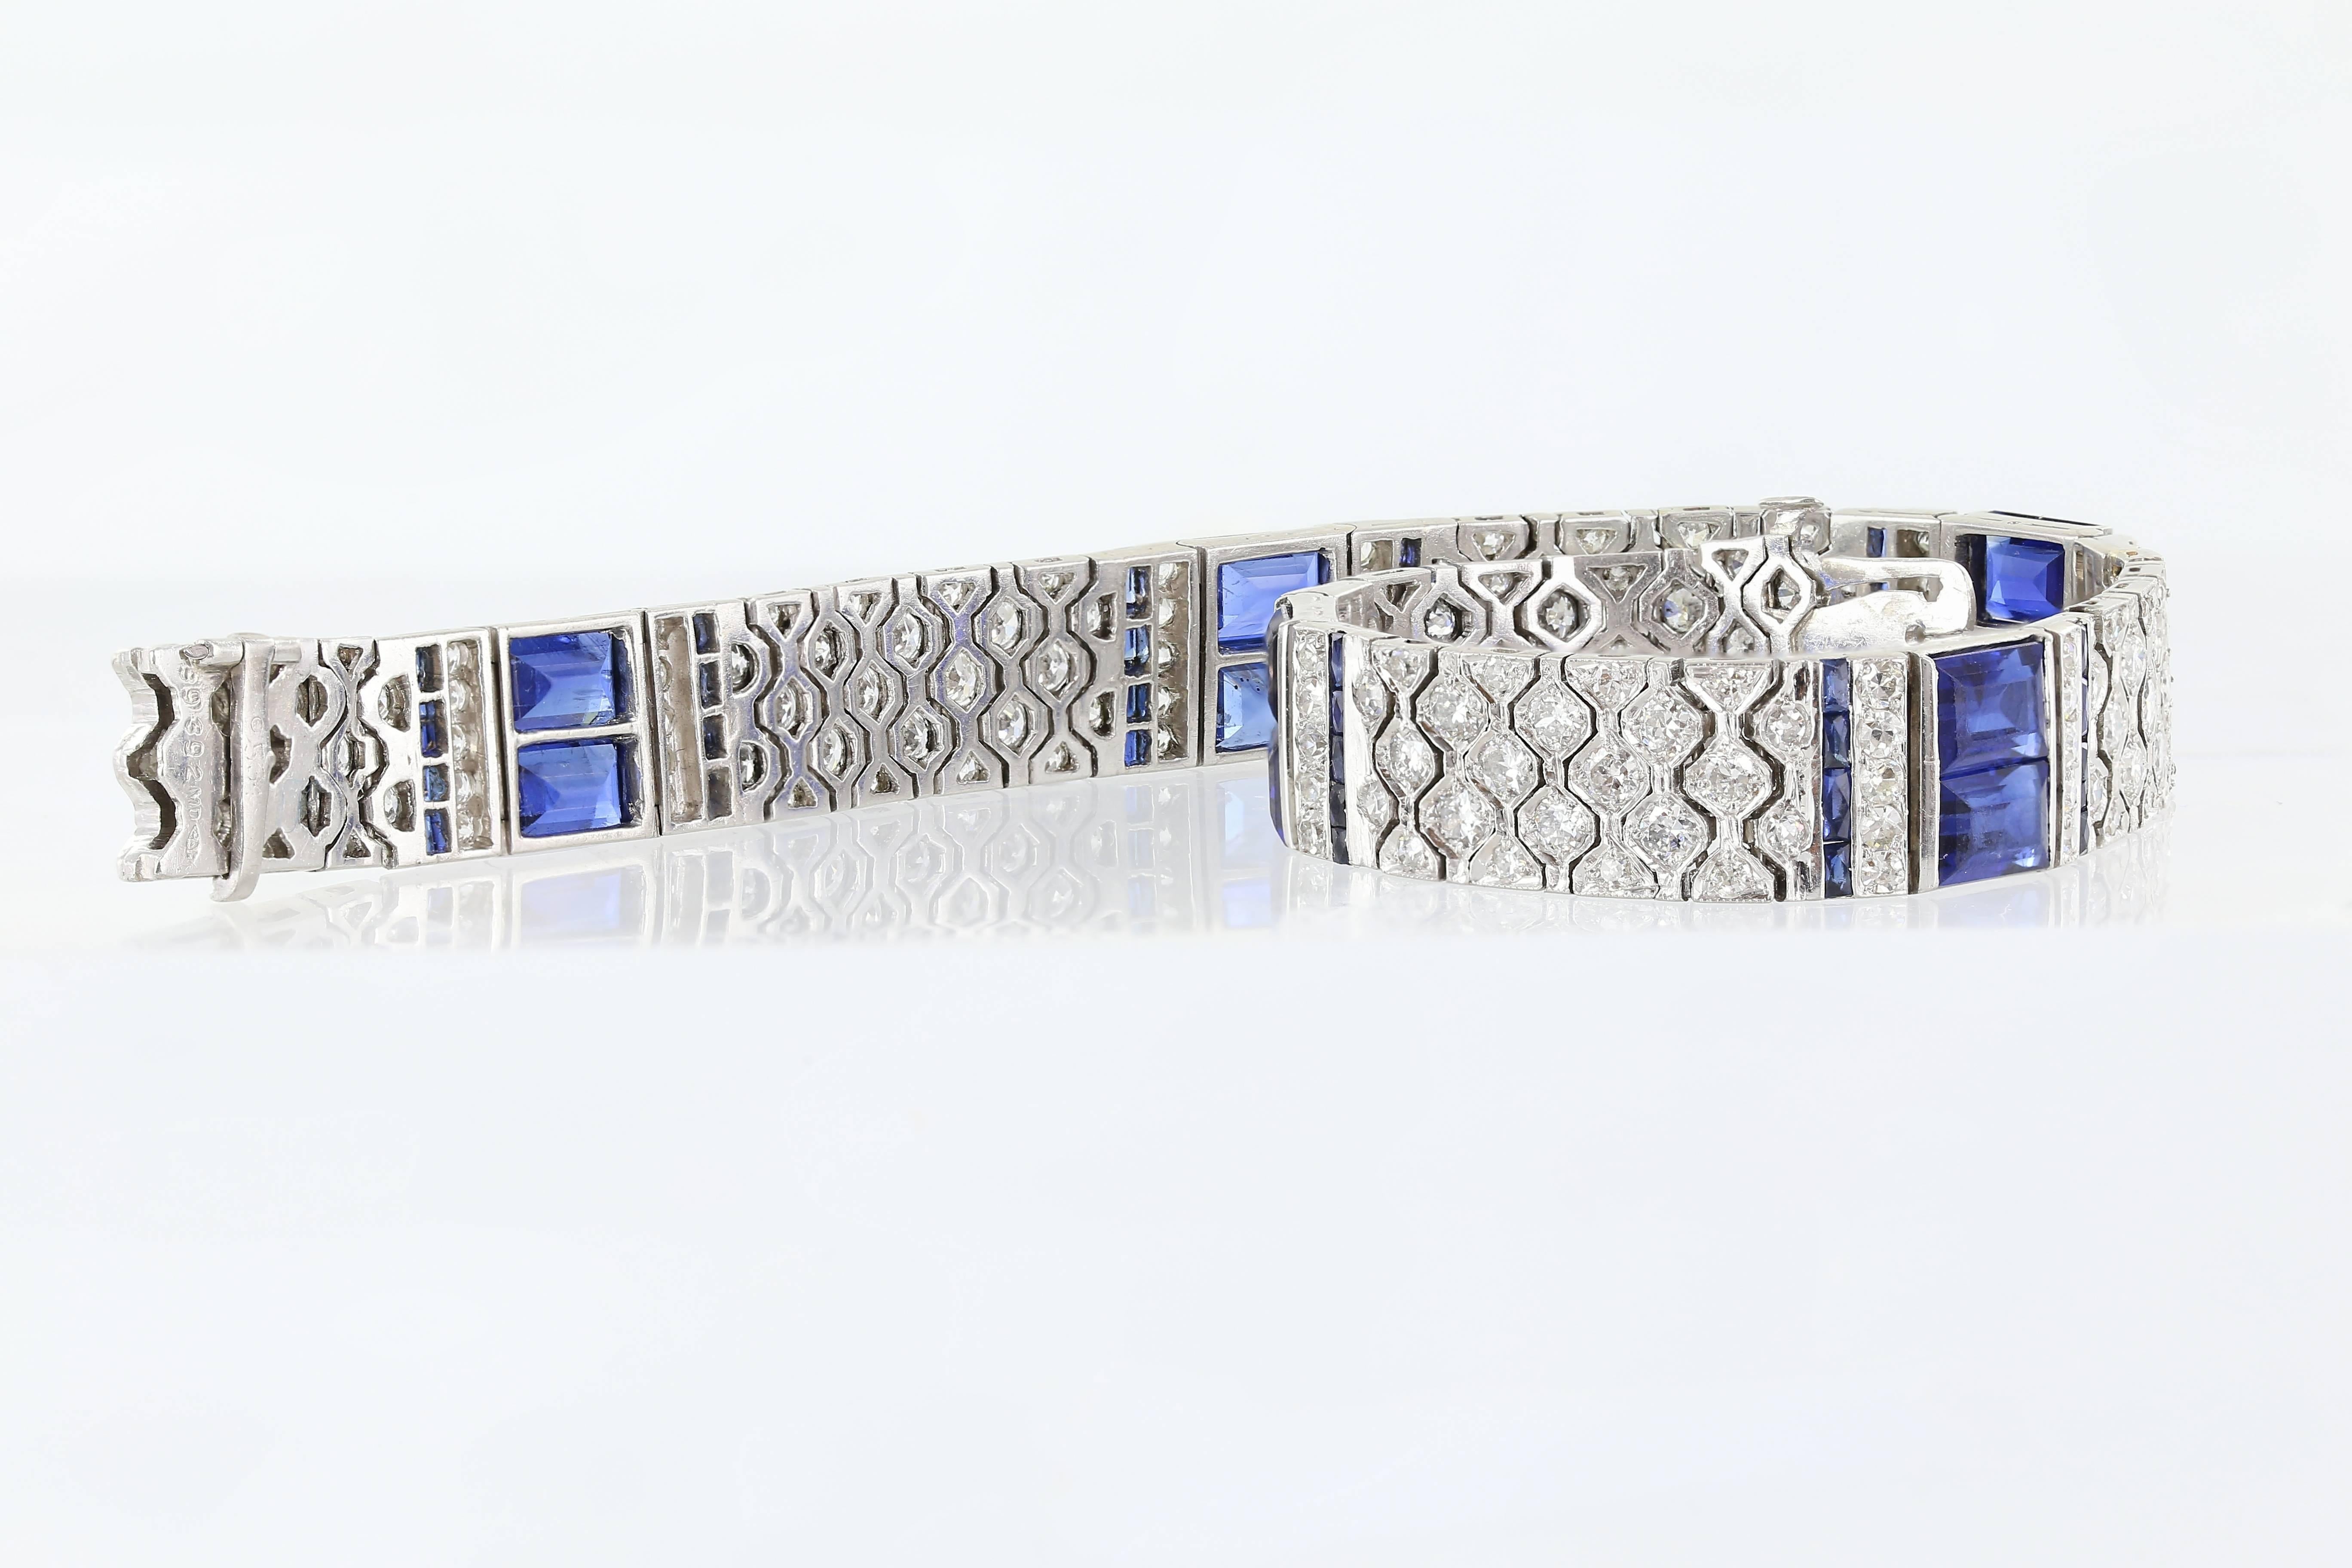 Platinum set signed Charles Hall art deco bracelet featuring approximately 4.5 carats of old mine cut diamonds and approximately 9.5 carats of emerald cut sapphires.  The diamonds have a color of D-E and a clarity of VS1. Charles Hall worked for